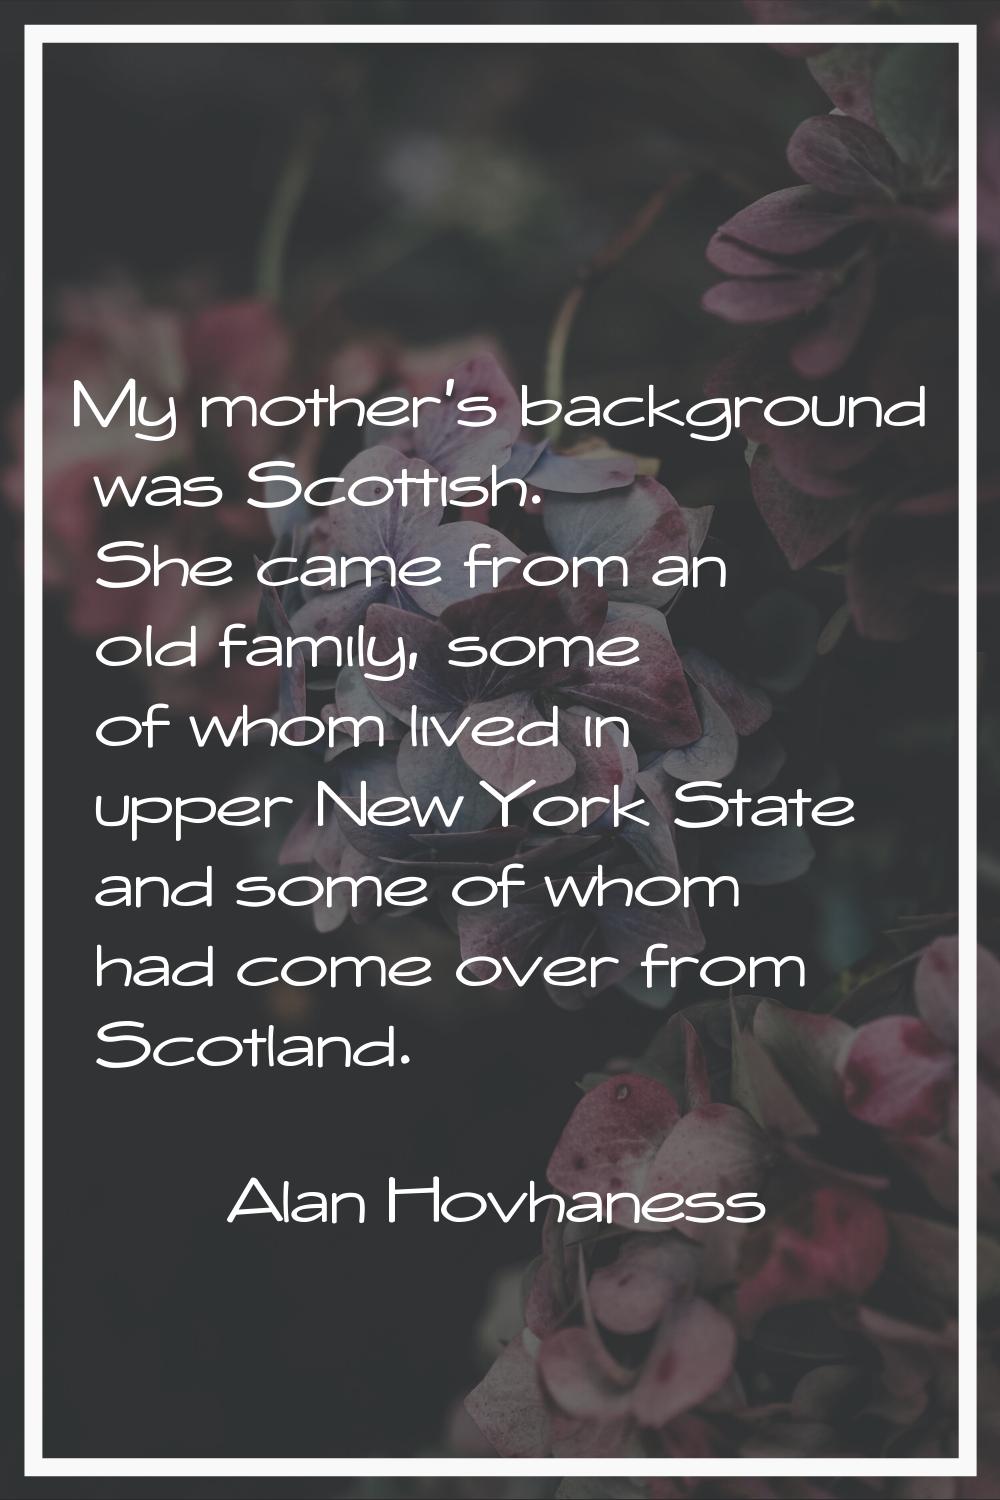 My mother's background was Scottish. She came from an old family, some of whom lived in upper New Y